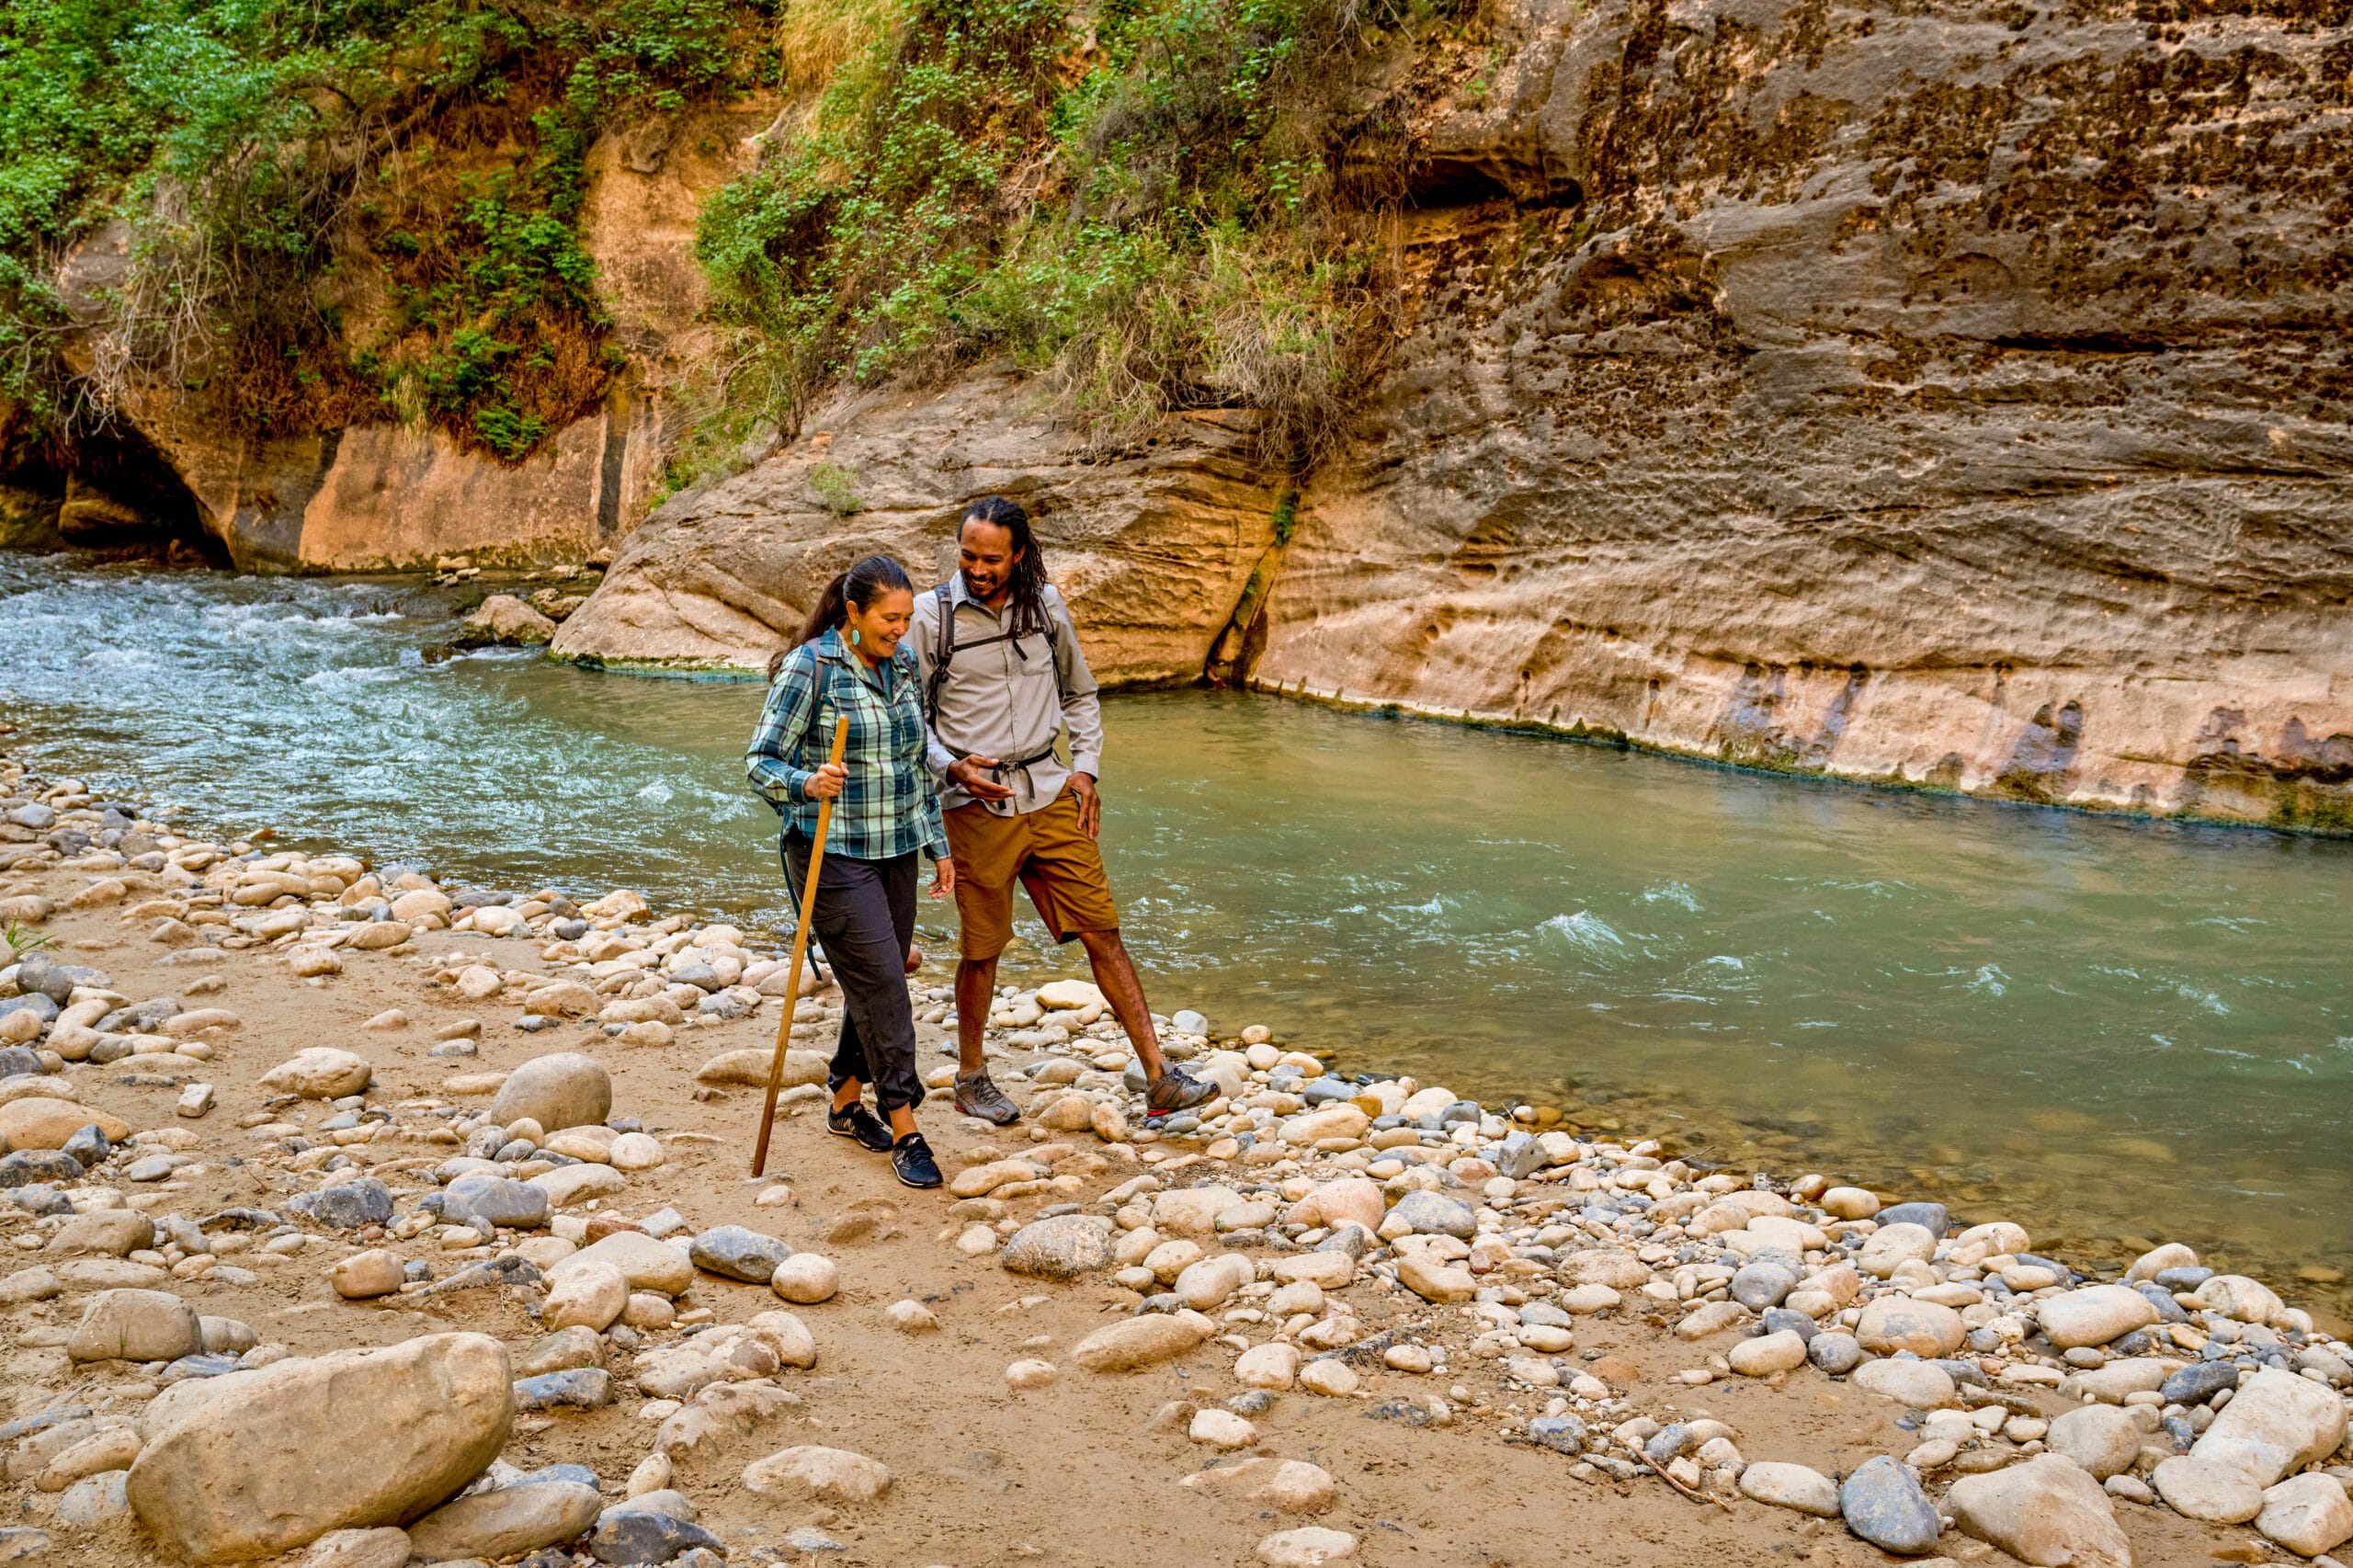 Two people standing next to a river in a canyon.